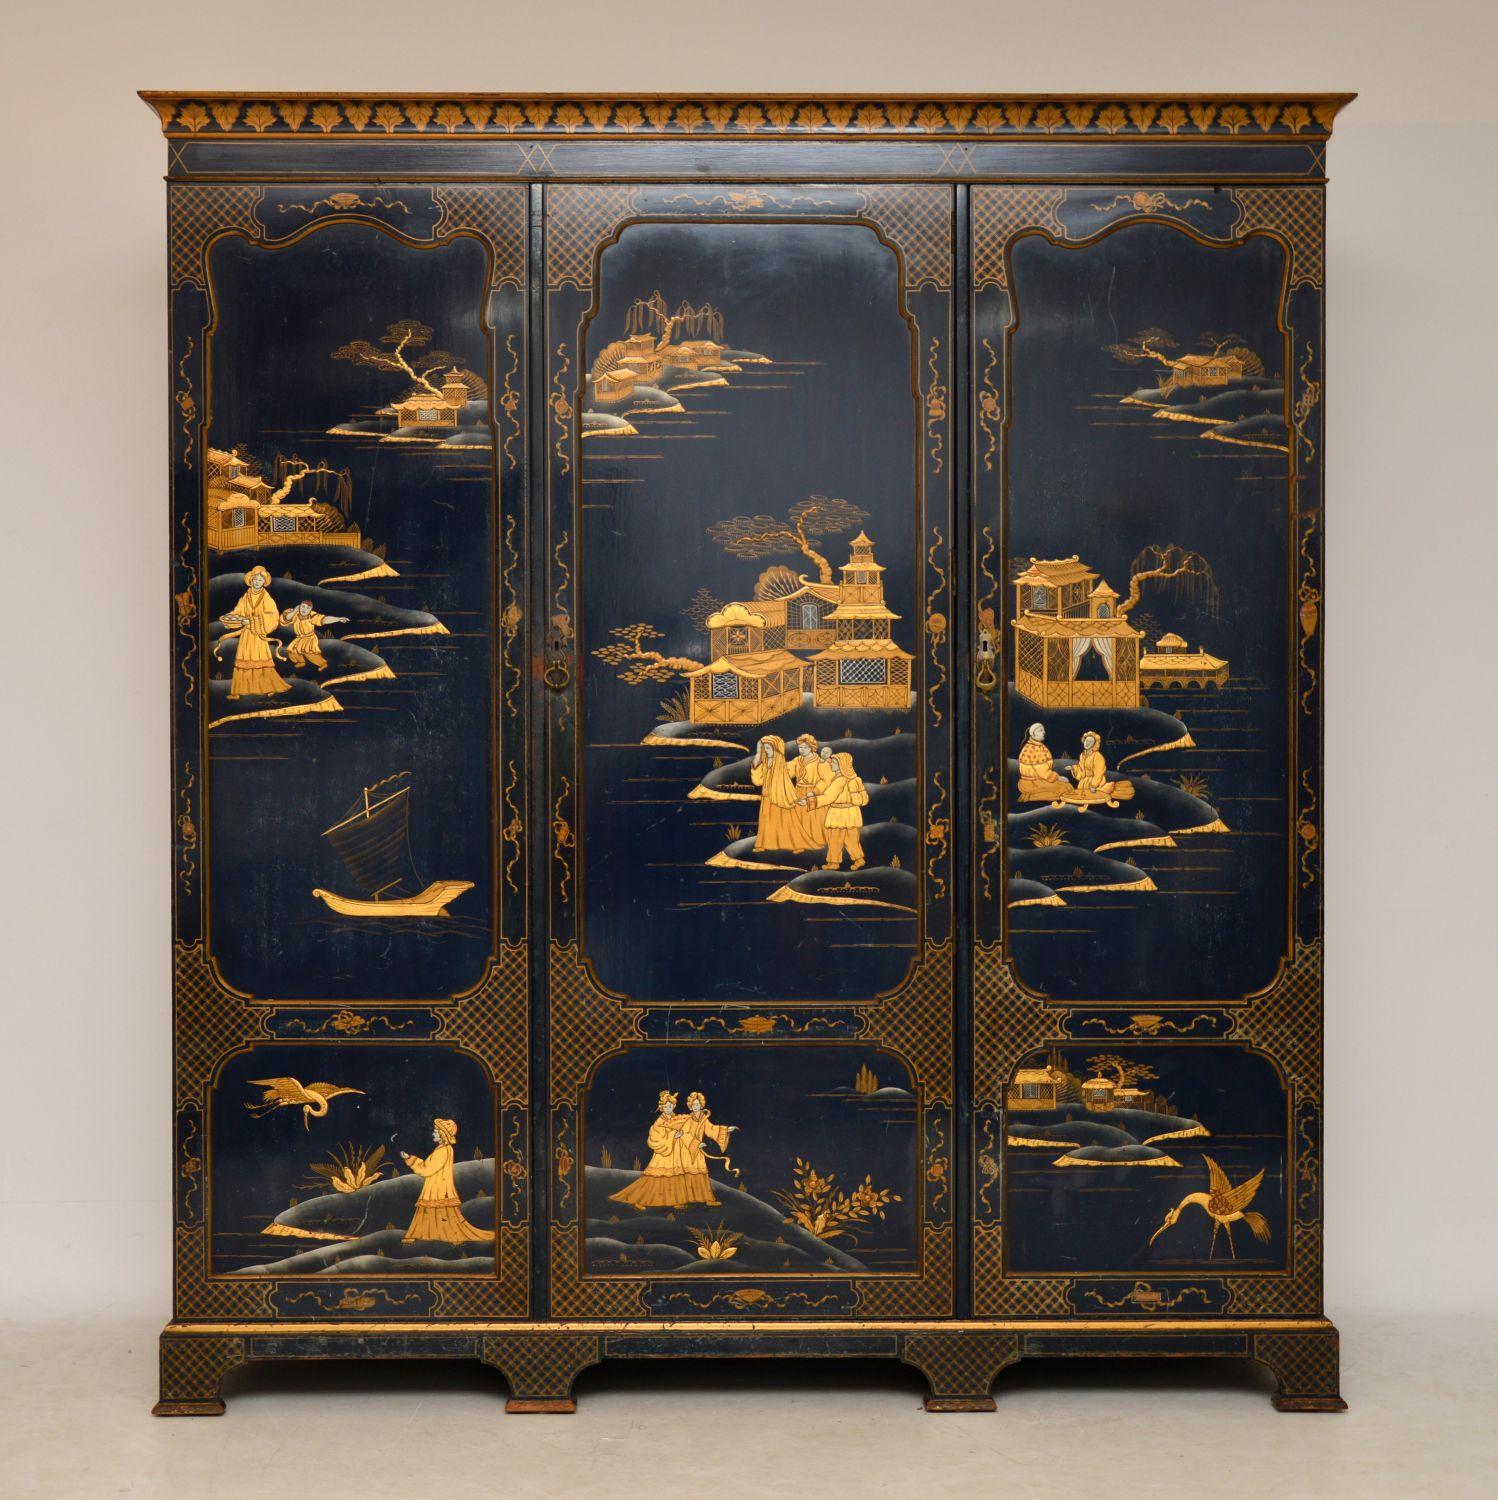 Antique three-door wardrobe covered in chinoiserie decoration dating from the 1910 period & made by the famous English cabinet maker Hille. It’s stunning quality inside & out, with a well fitted interior consisting of drawers, slides, shelves & a